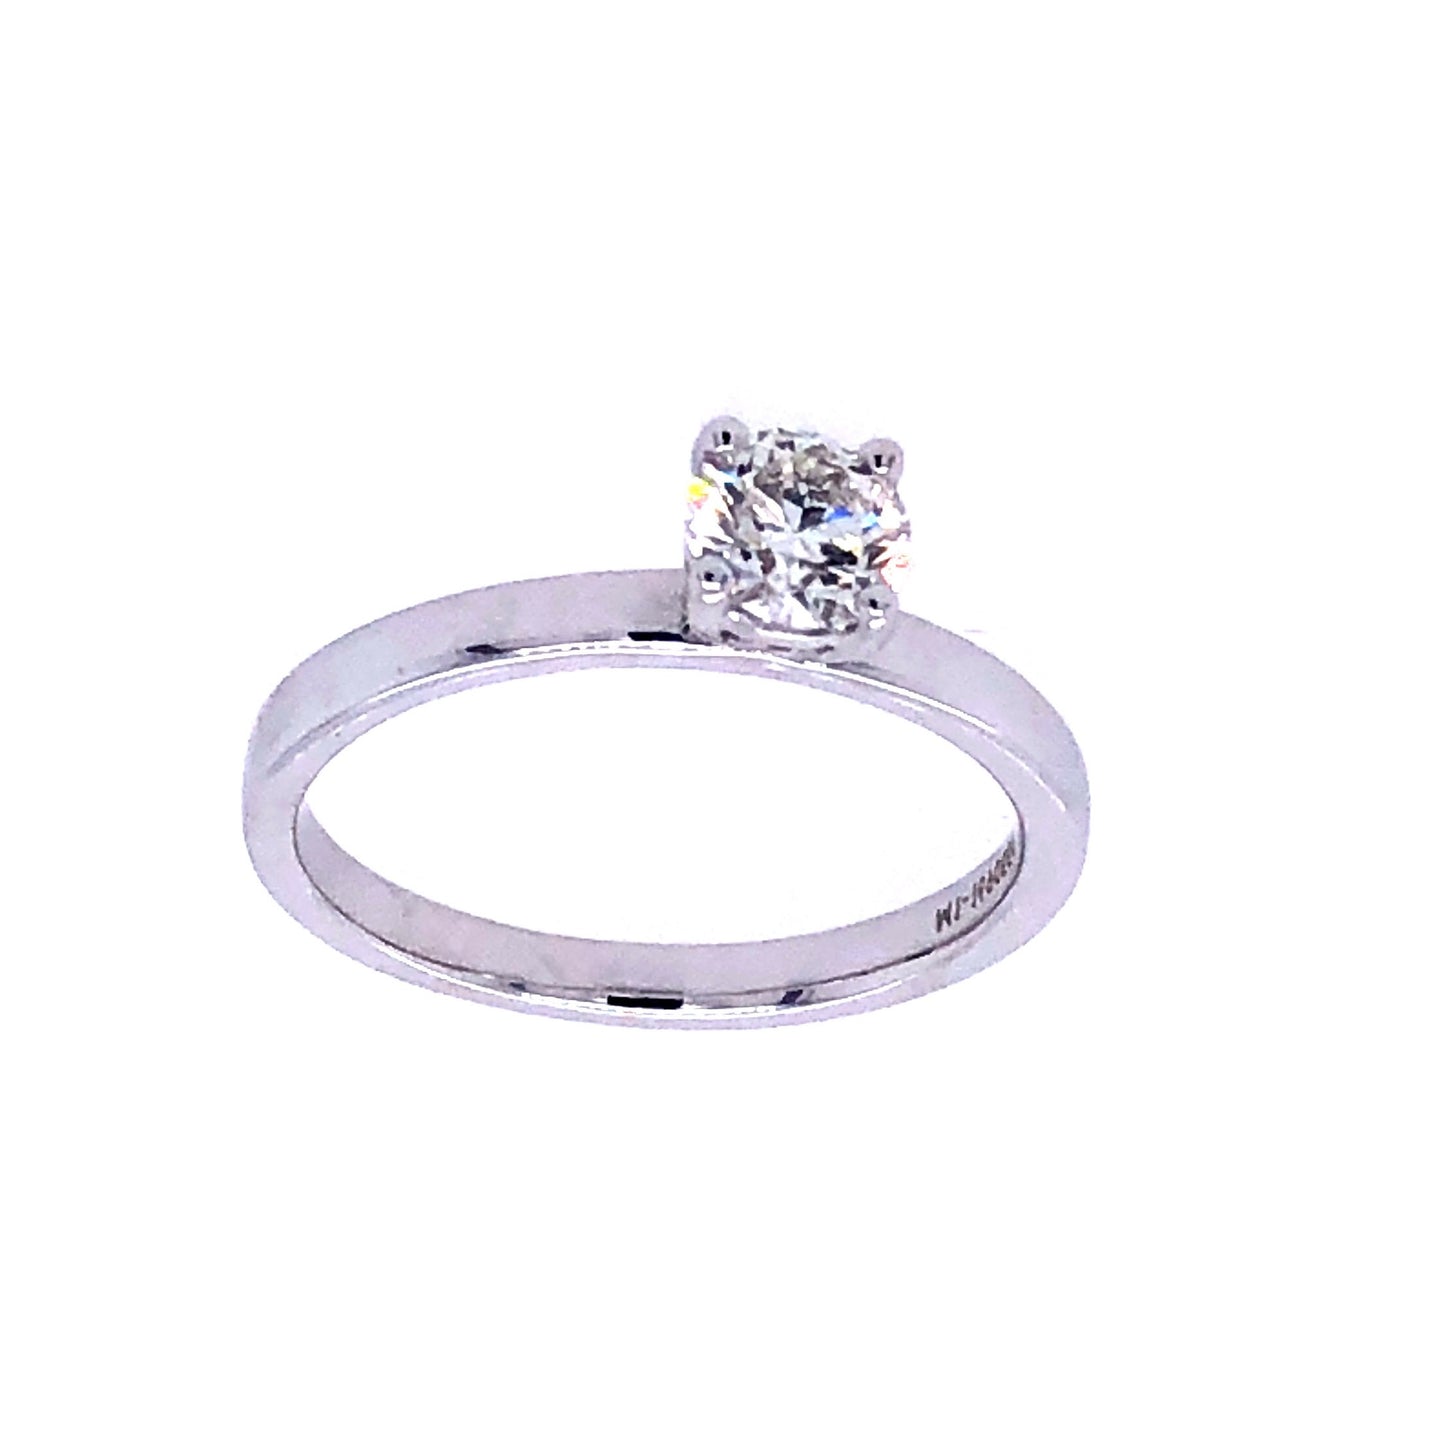 18k Solitaire 0.50cts Cupid Cut Diamonds White Gold Engagement Ring | Luby Diamond Collection | Luby 